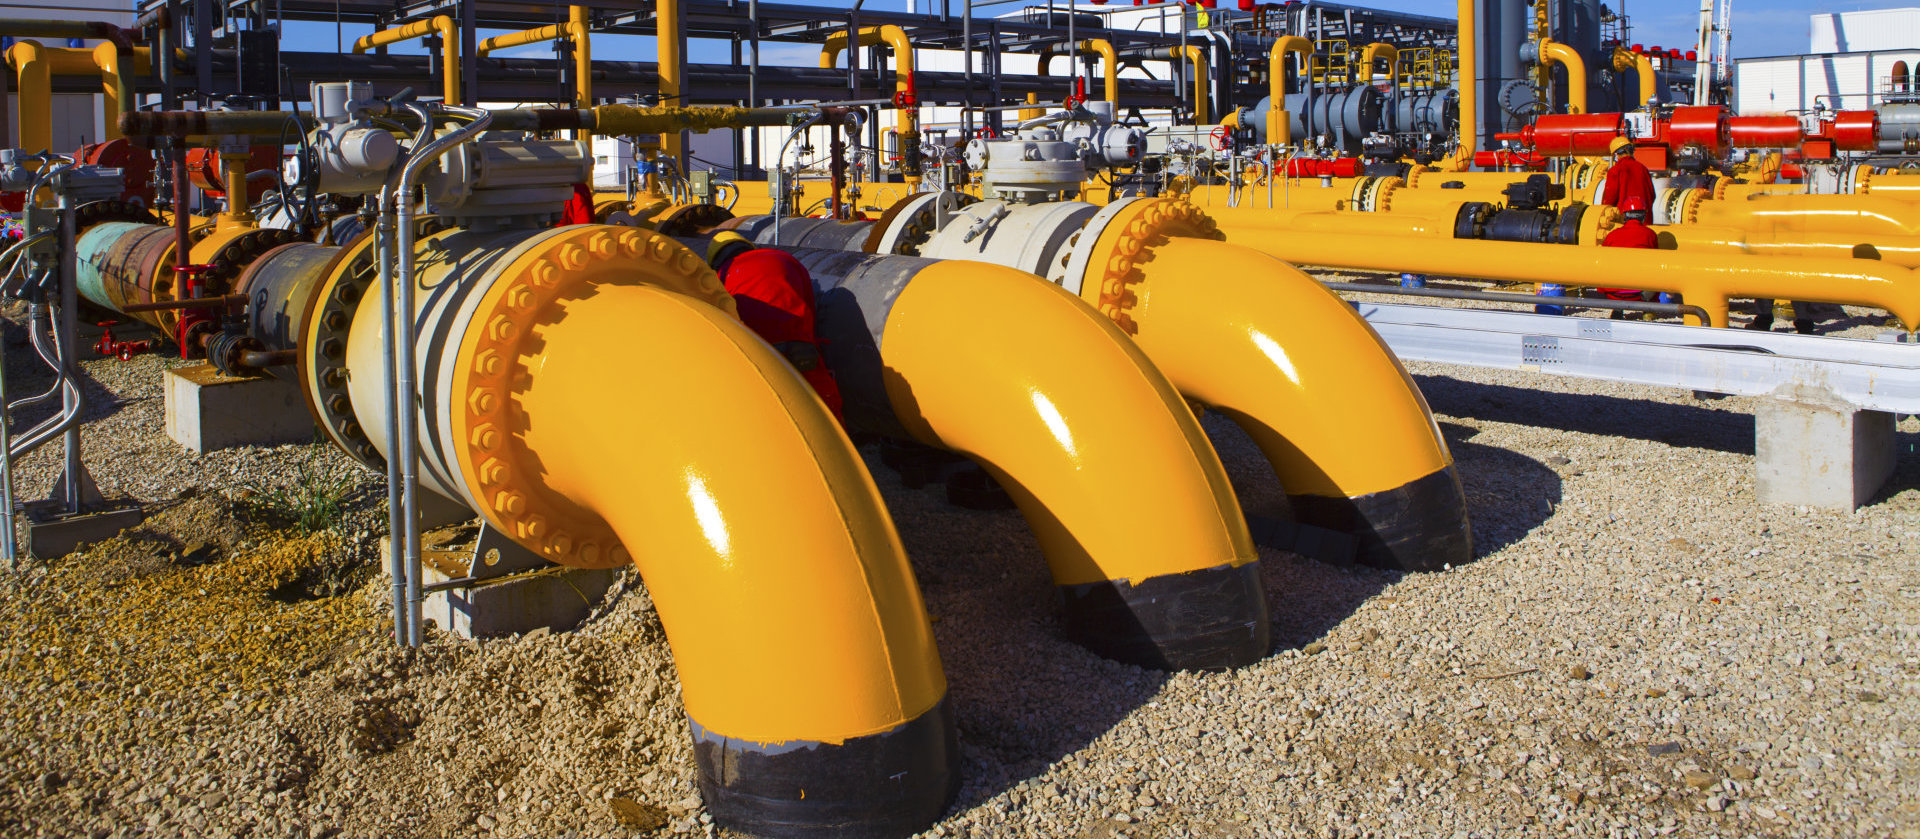 electrical site, yellow tubes